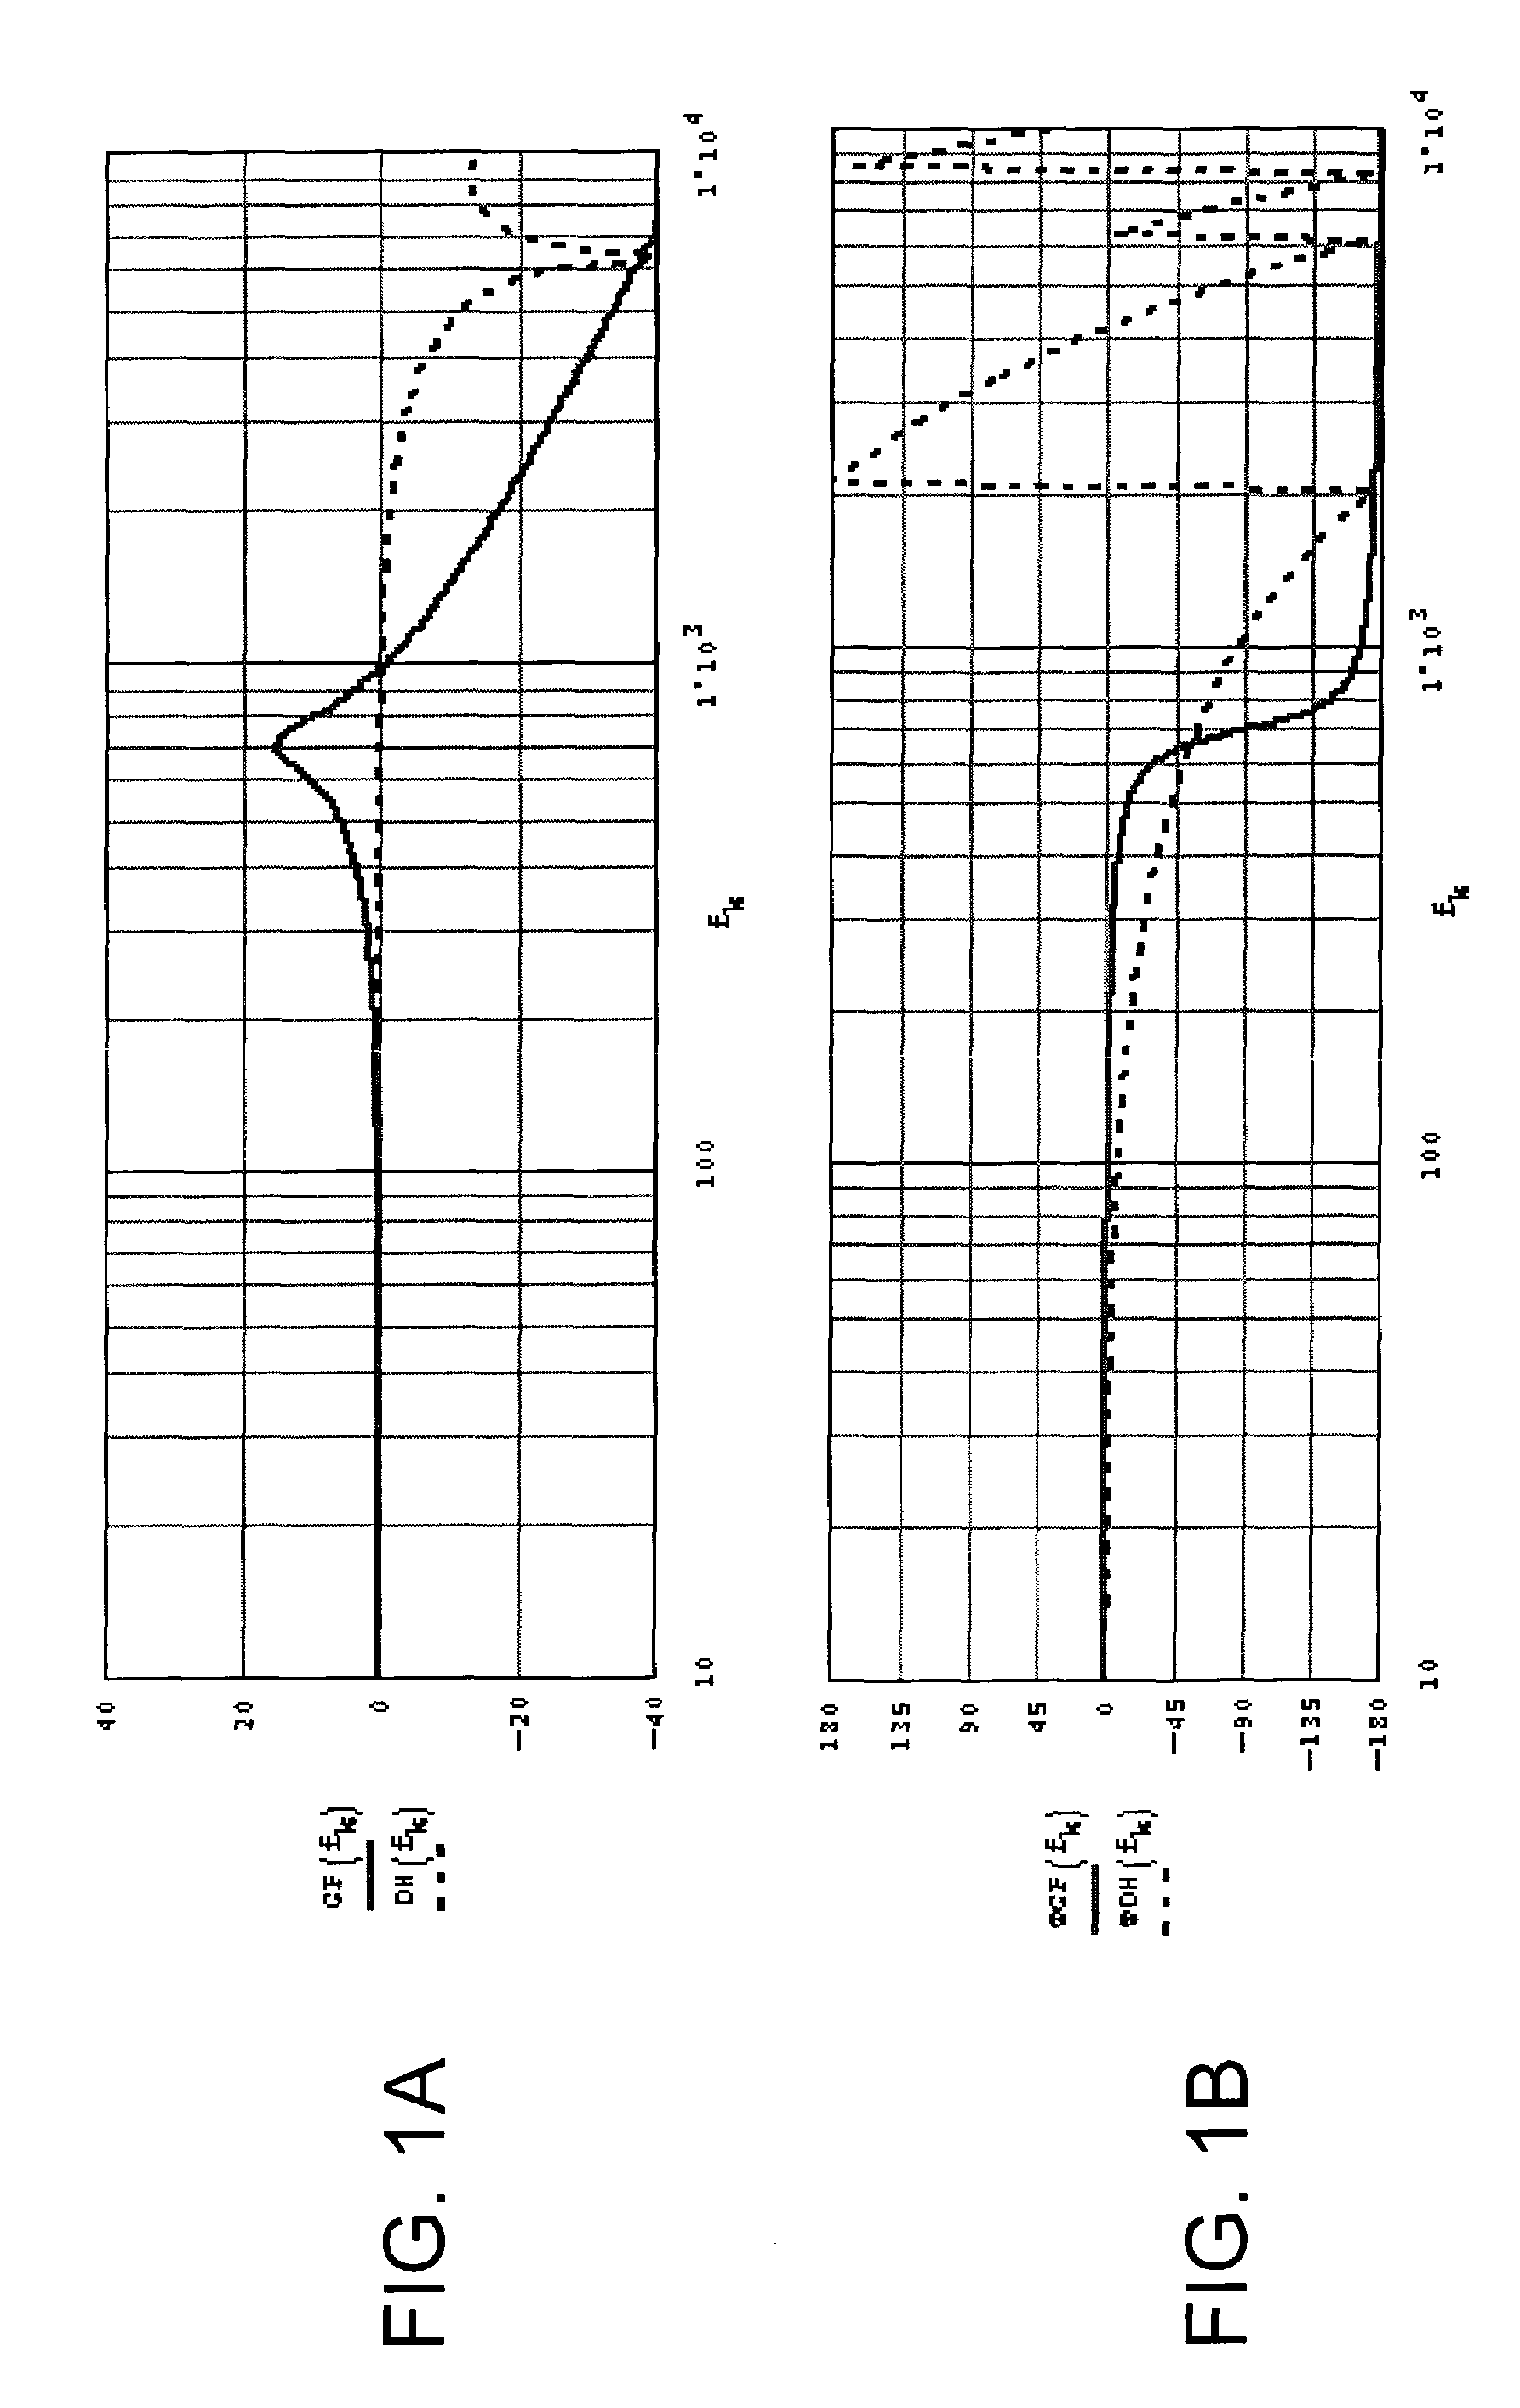 PWM power supplies using controlled feedback timing and methods of operating same